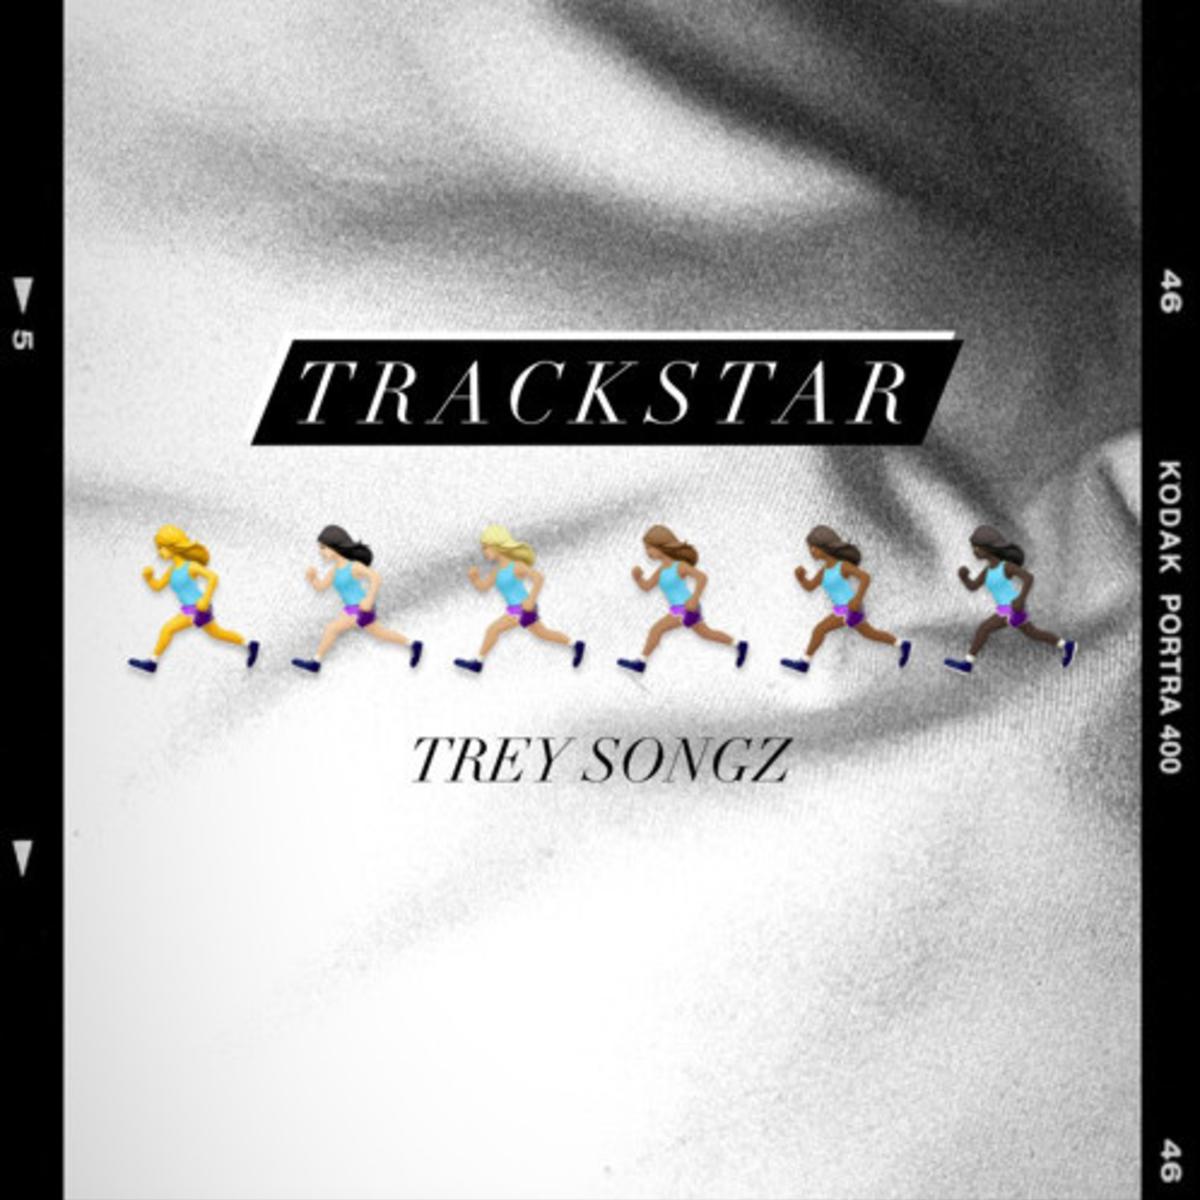 Trey Songz Gives “Track Star” A TriggaMix